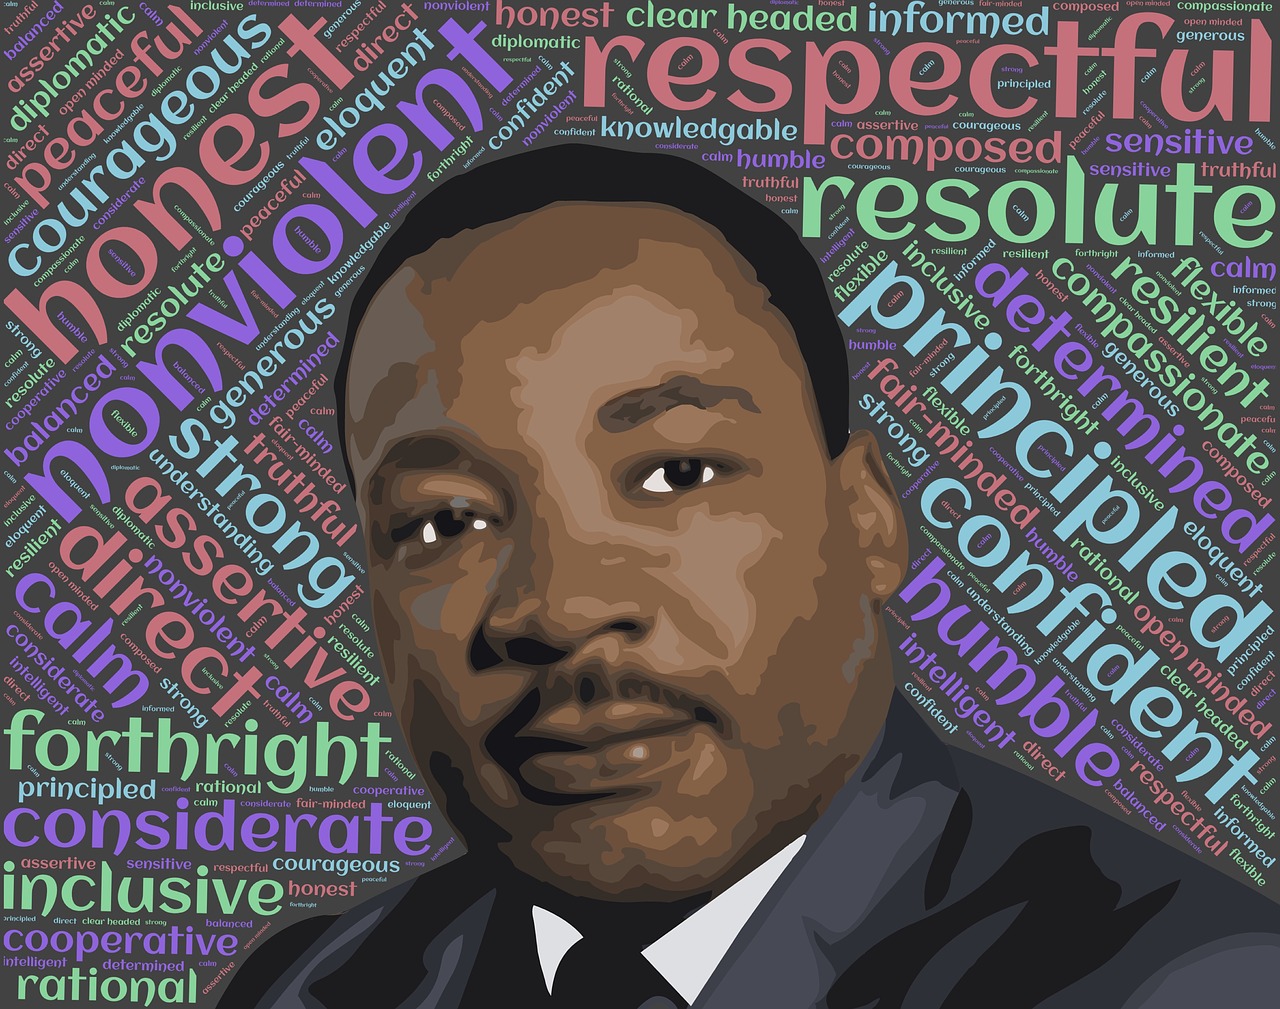 Martin Luther King Jr. on word cloud background